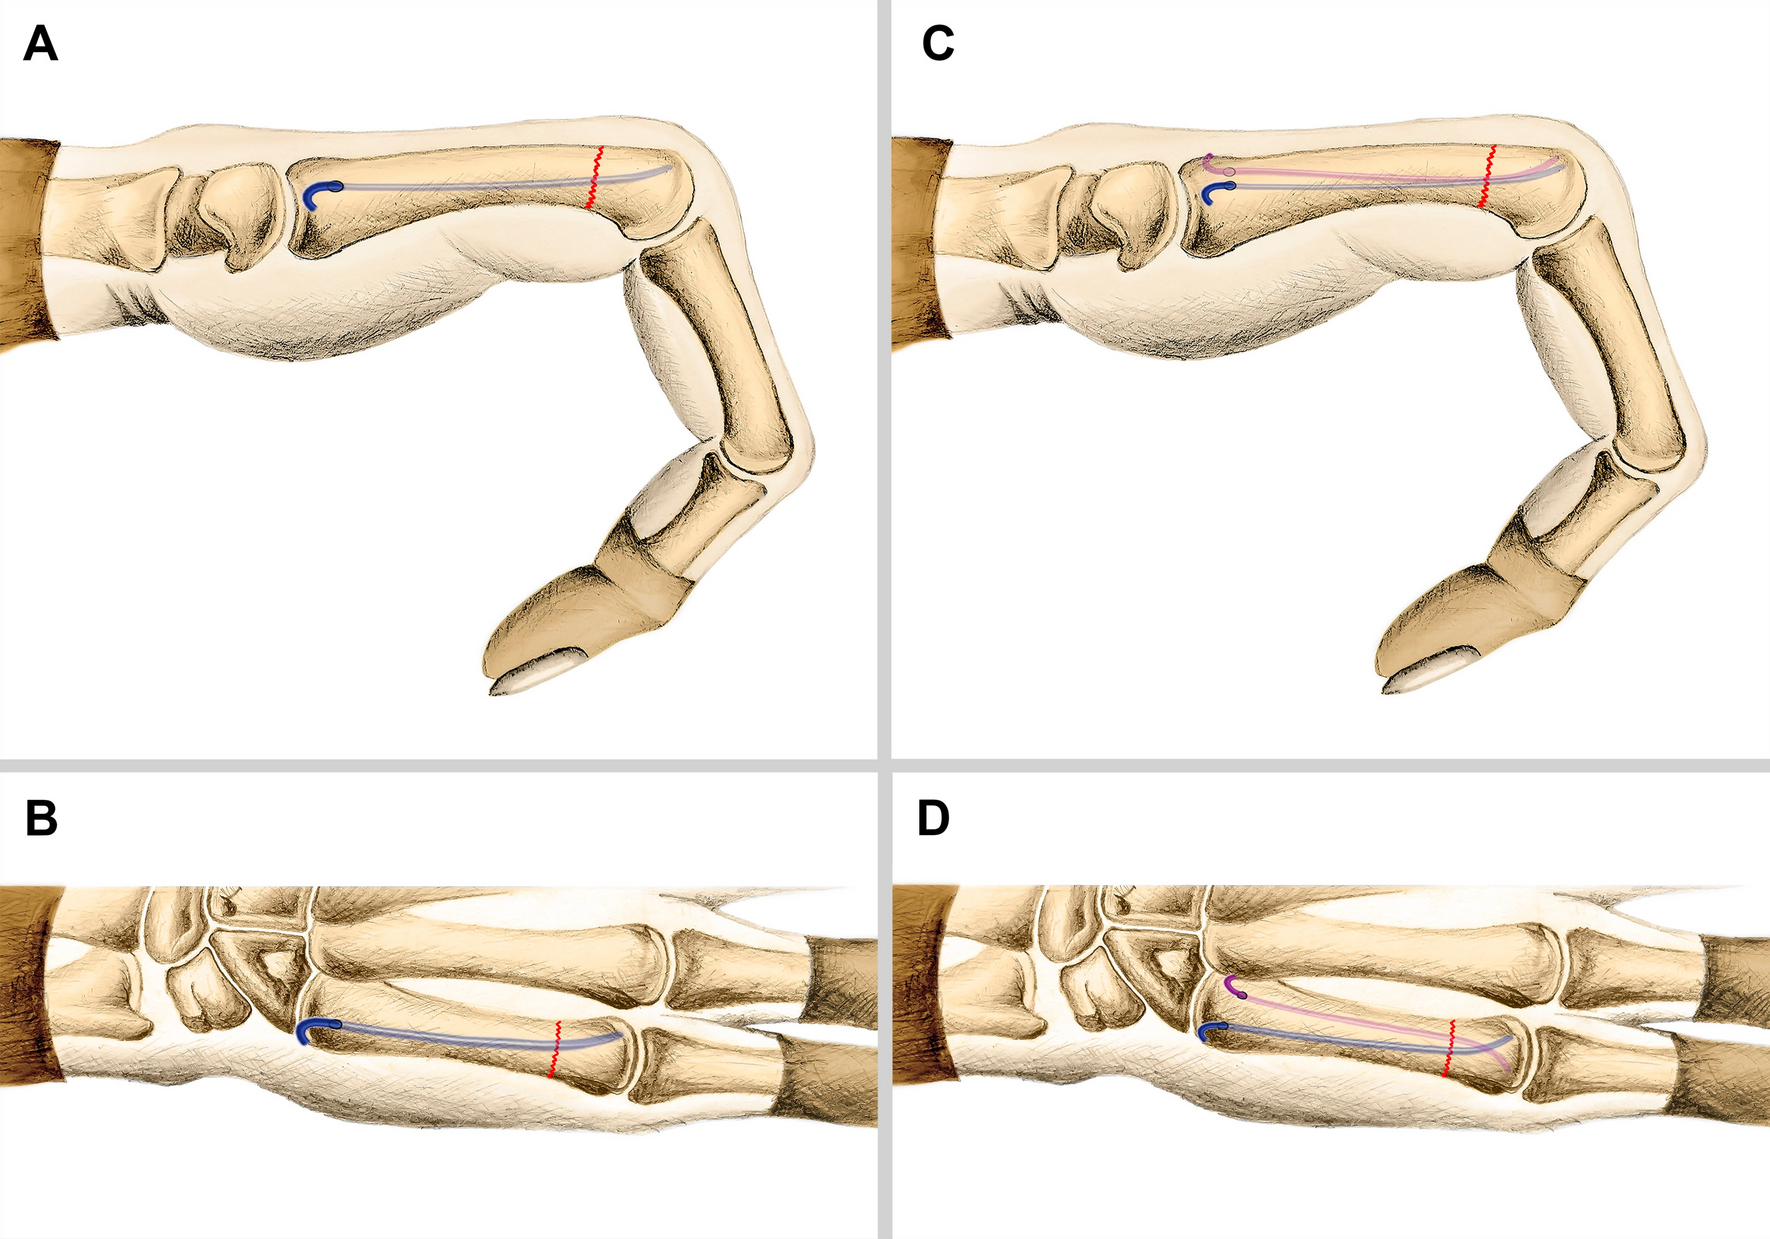 Single versus dual elastic nails for closed reduction and antegrade intramedullary  nailing of displaced fifth metacarpal neck fractures | Scientific Reports